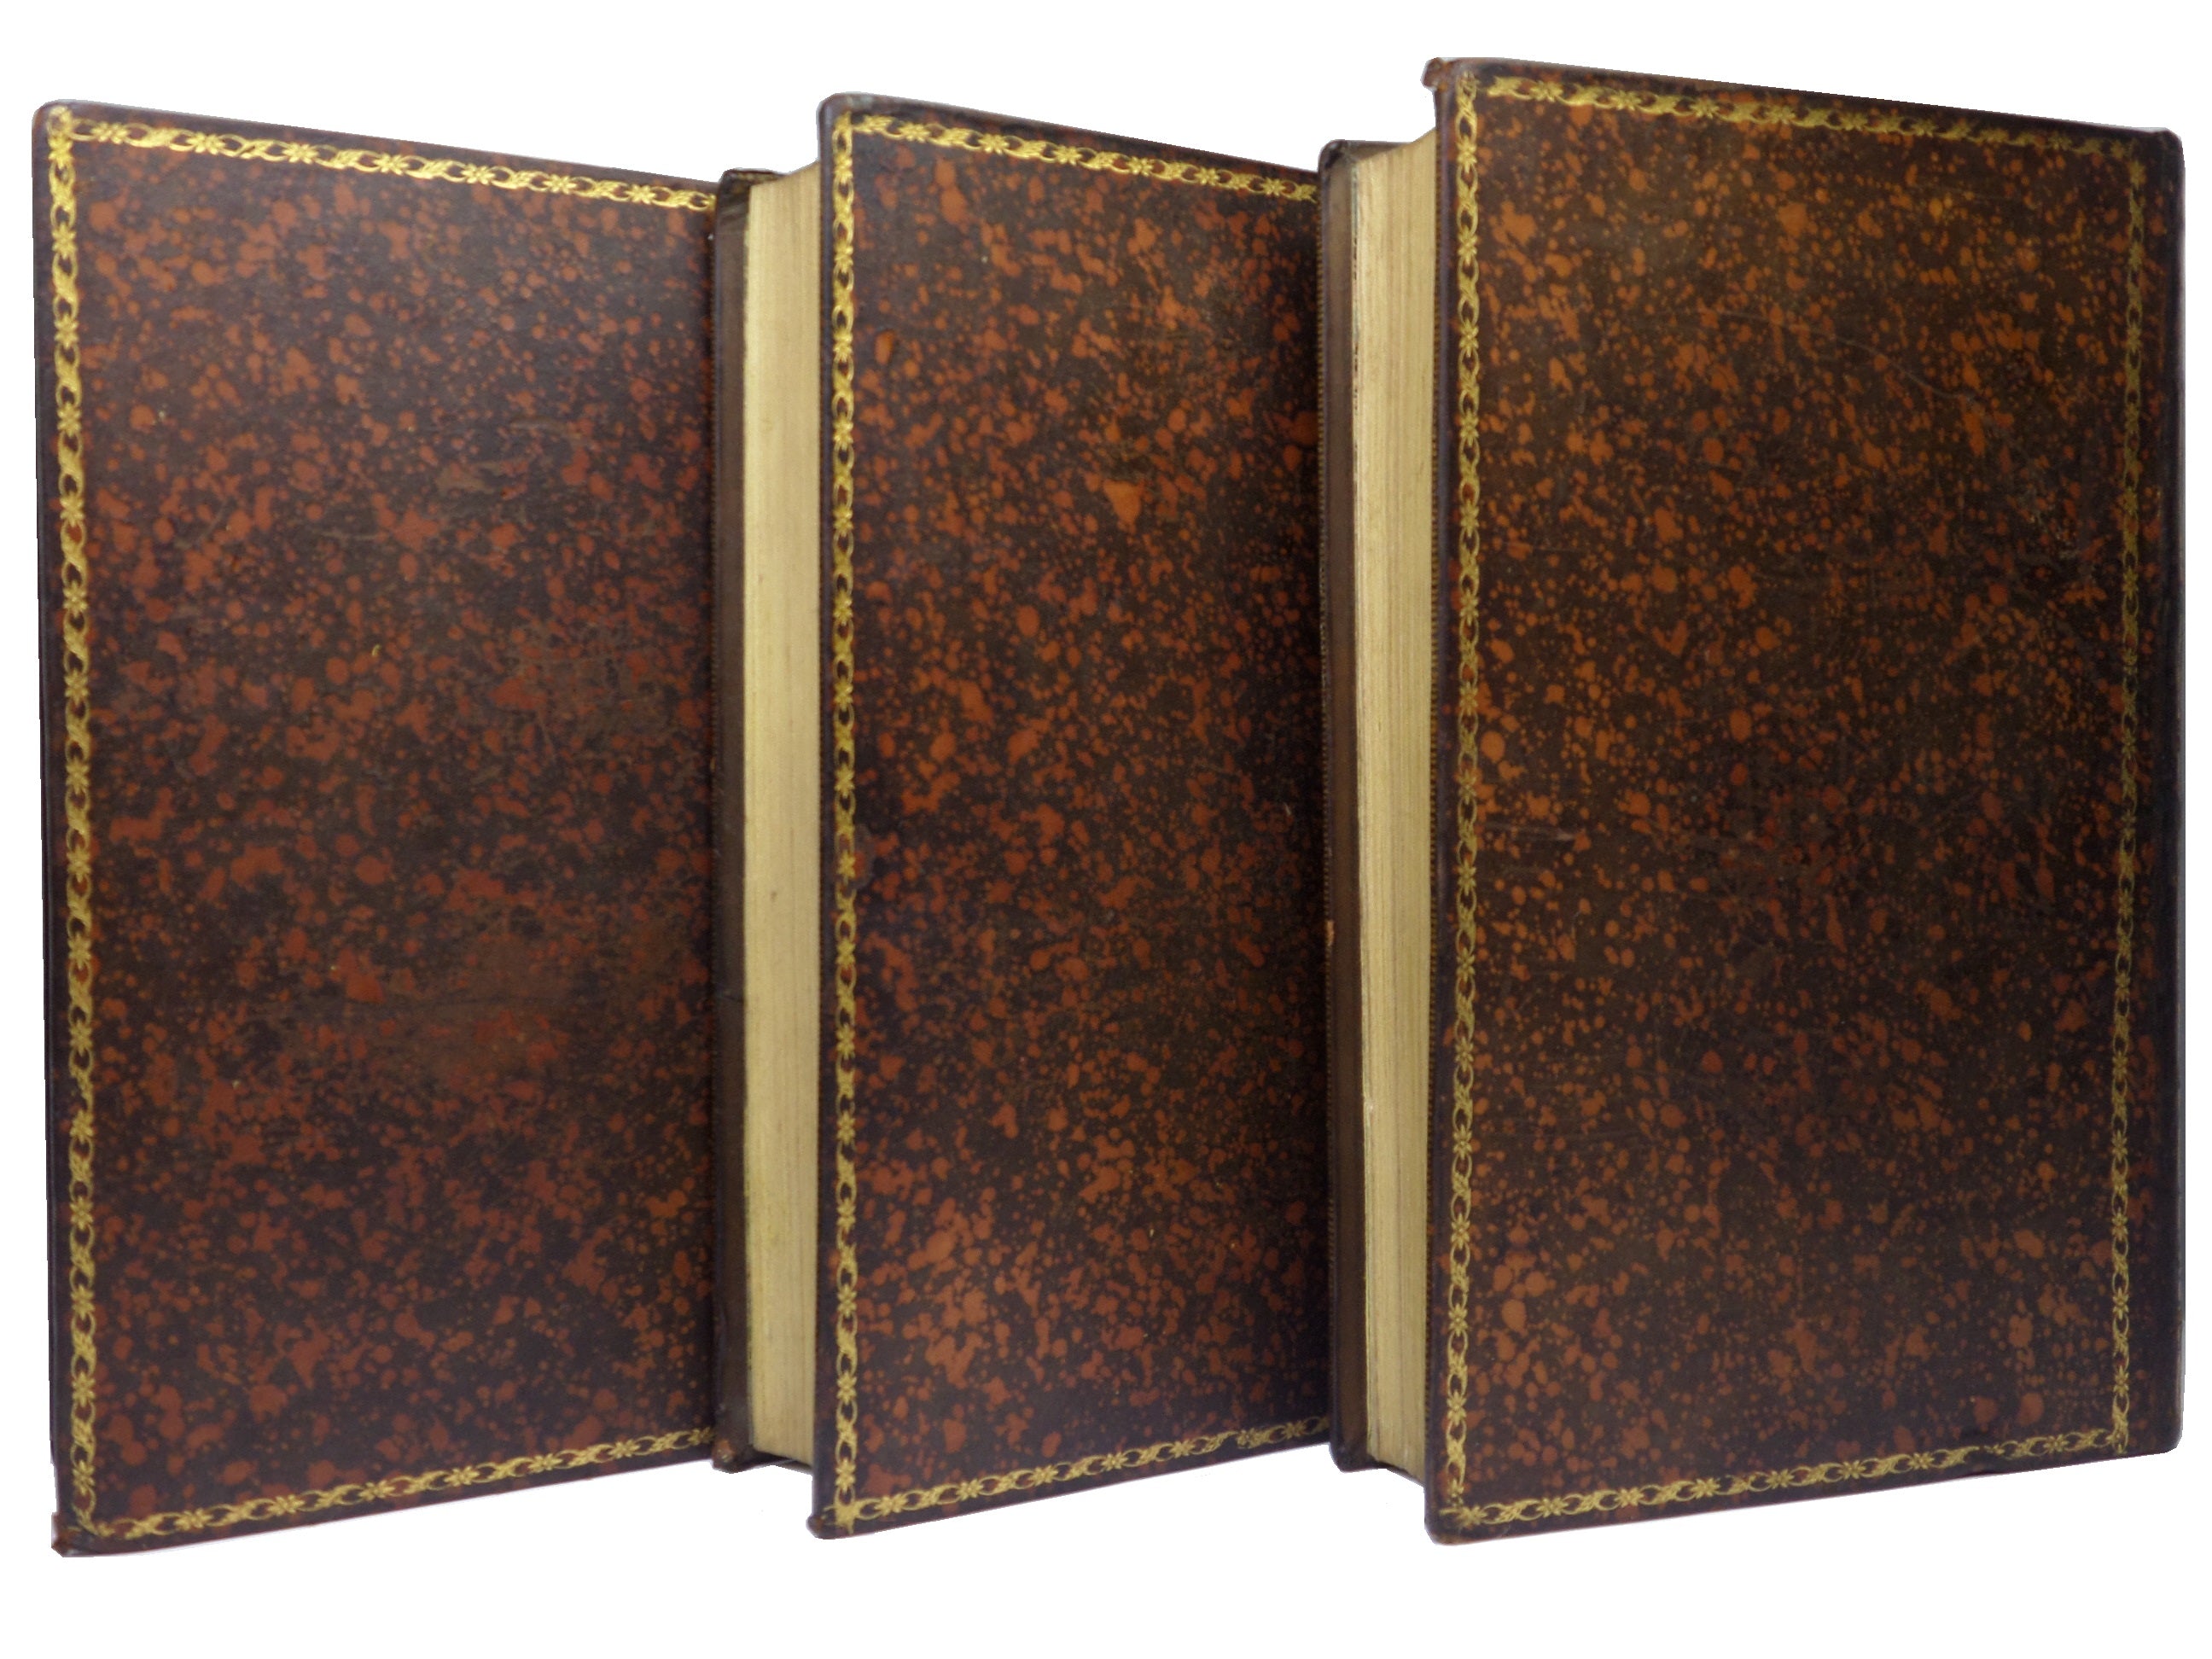 THE PLAYS & POEMS OF WILLIAM SHAKESPEARE 1790 FIRST EDMOND MALONE EDITION, LEATHER-BOUND IN 11 VOLUMES